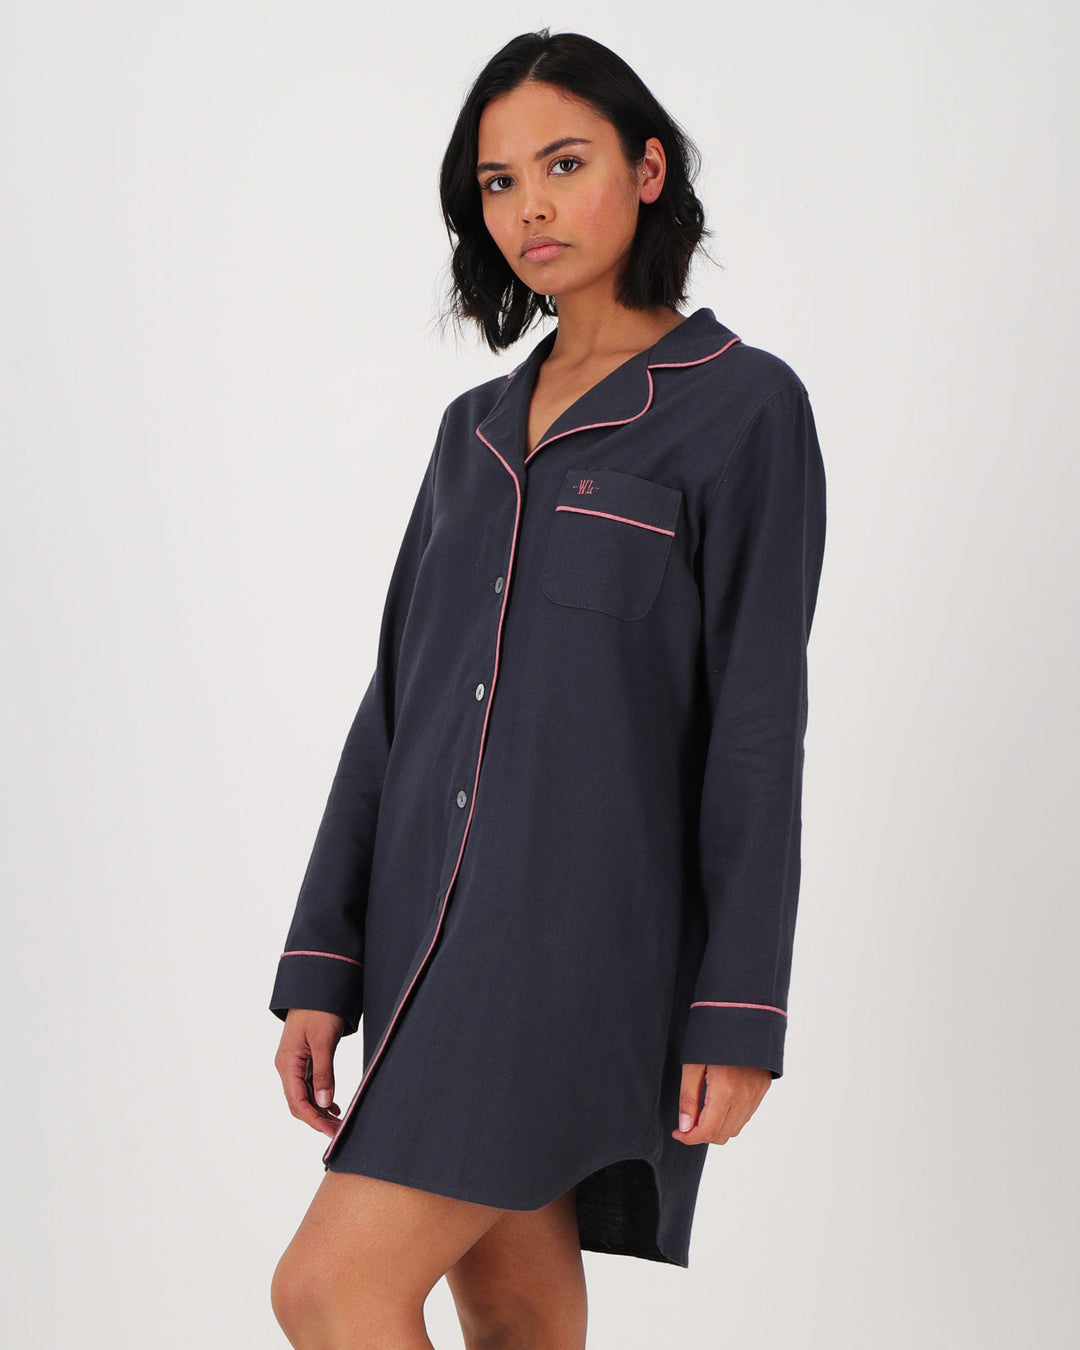 Womens Charcoal Flannel Sleepshirt Front Pink Piping - Woodstock Laundry